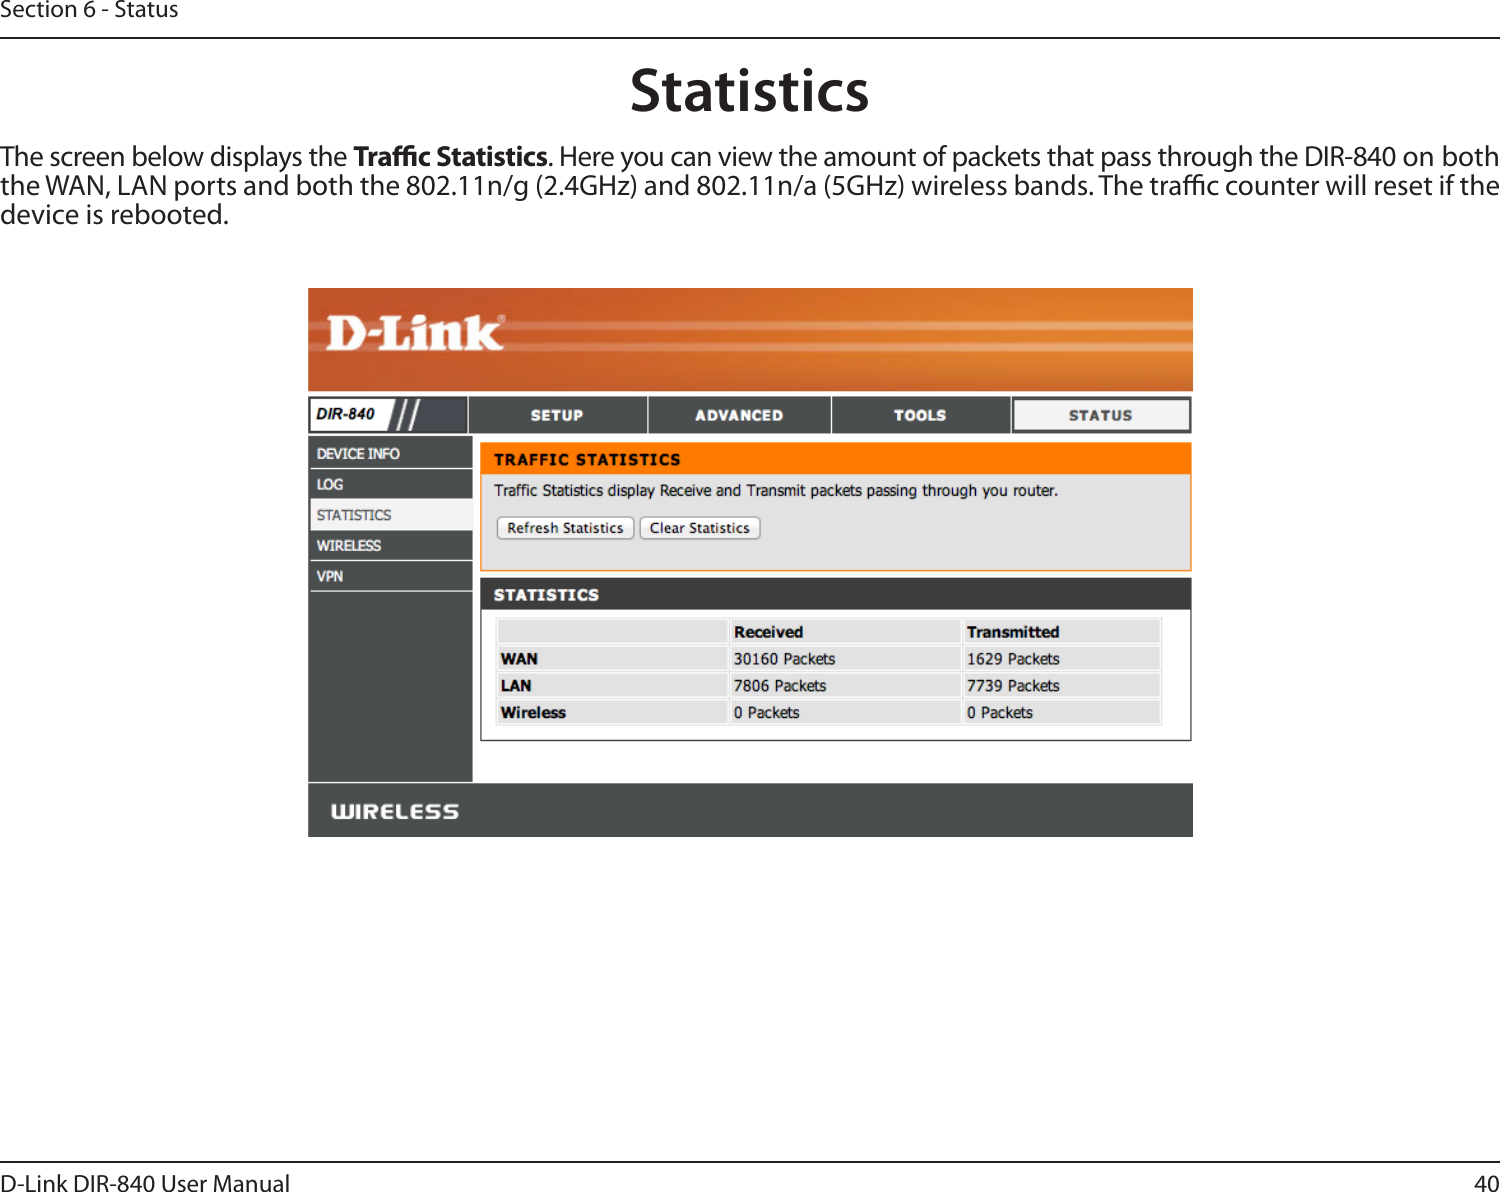 40D-Link DIR-840 User ManualSection 6 - StatusStatisticsThe screen below displays the Trac Statistics. Here you can view the amount of packets that pass through the DIR-840 on both the WAN, LAN ports and both the 802.11n/g (2.4GHz) and 802.11n/a (5GHz) wireless bands. The trac counter will reset if the device is rebooted.